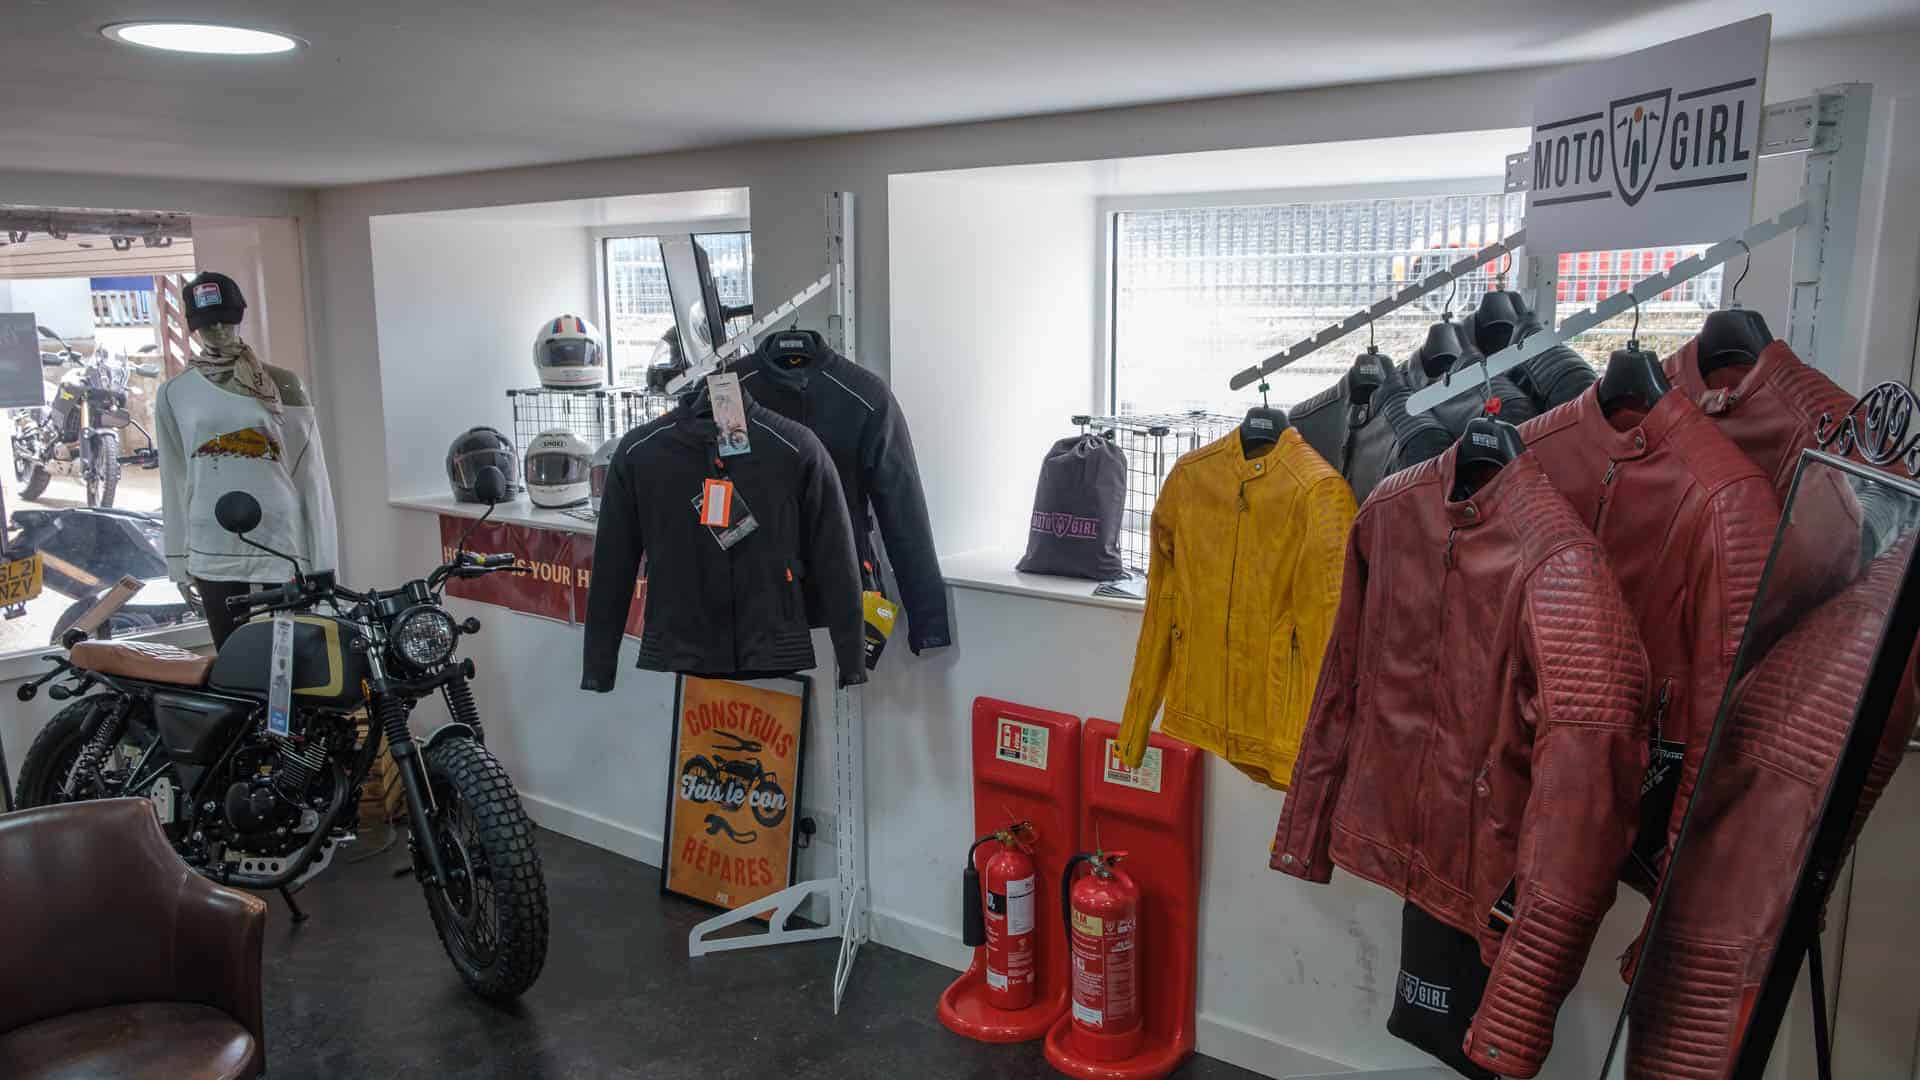 Motorcycle clothing and motorcycle